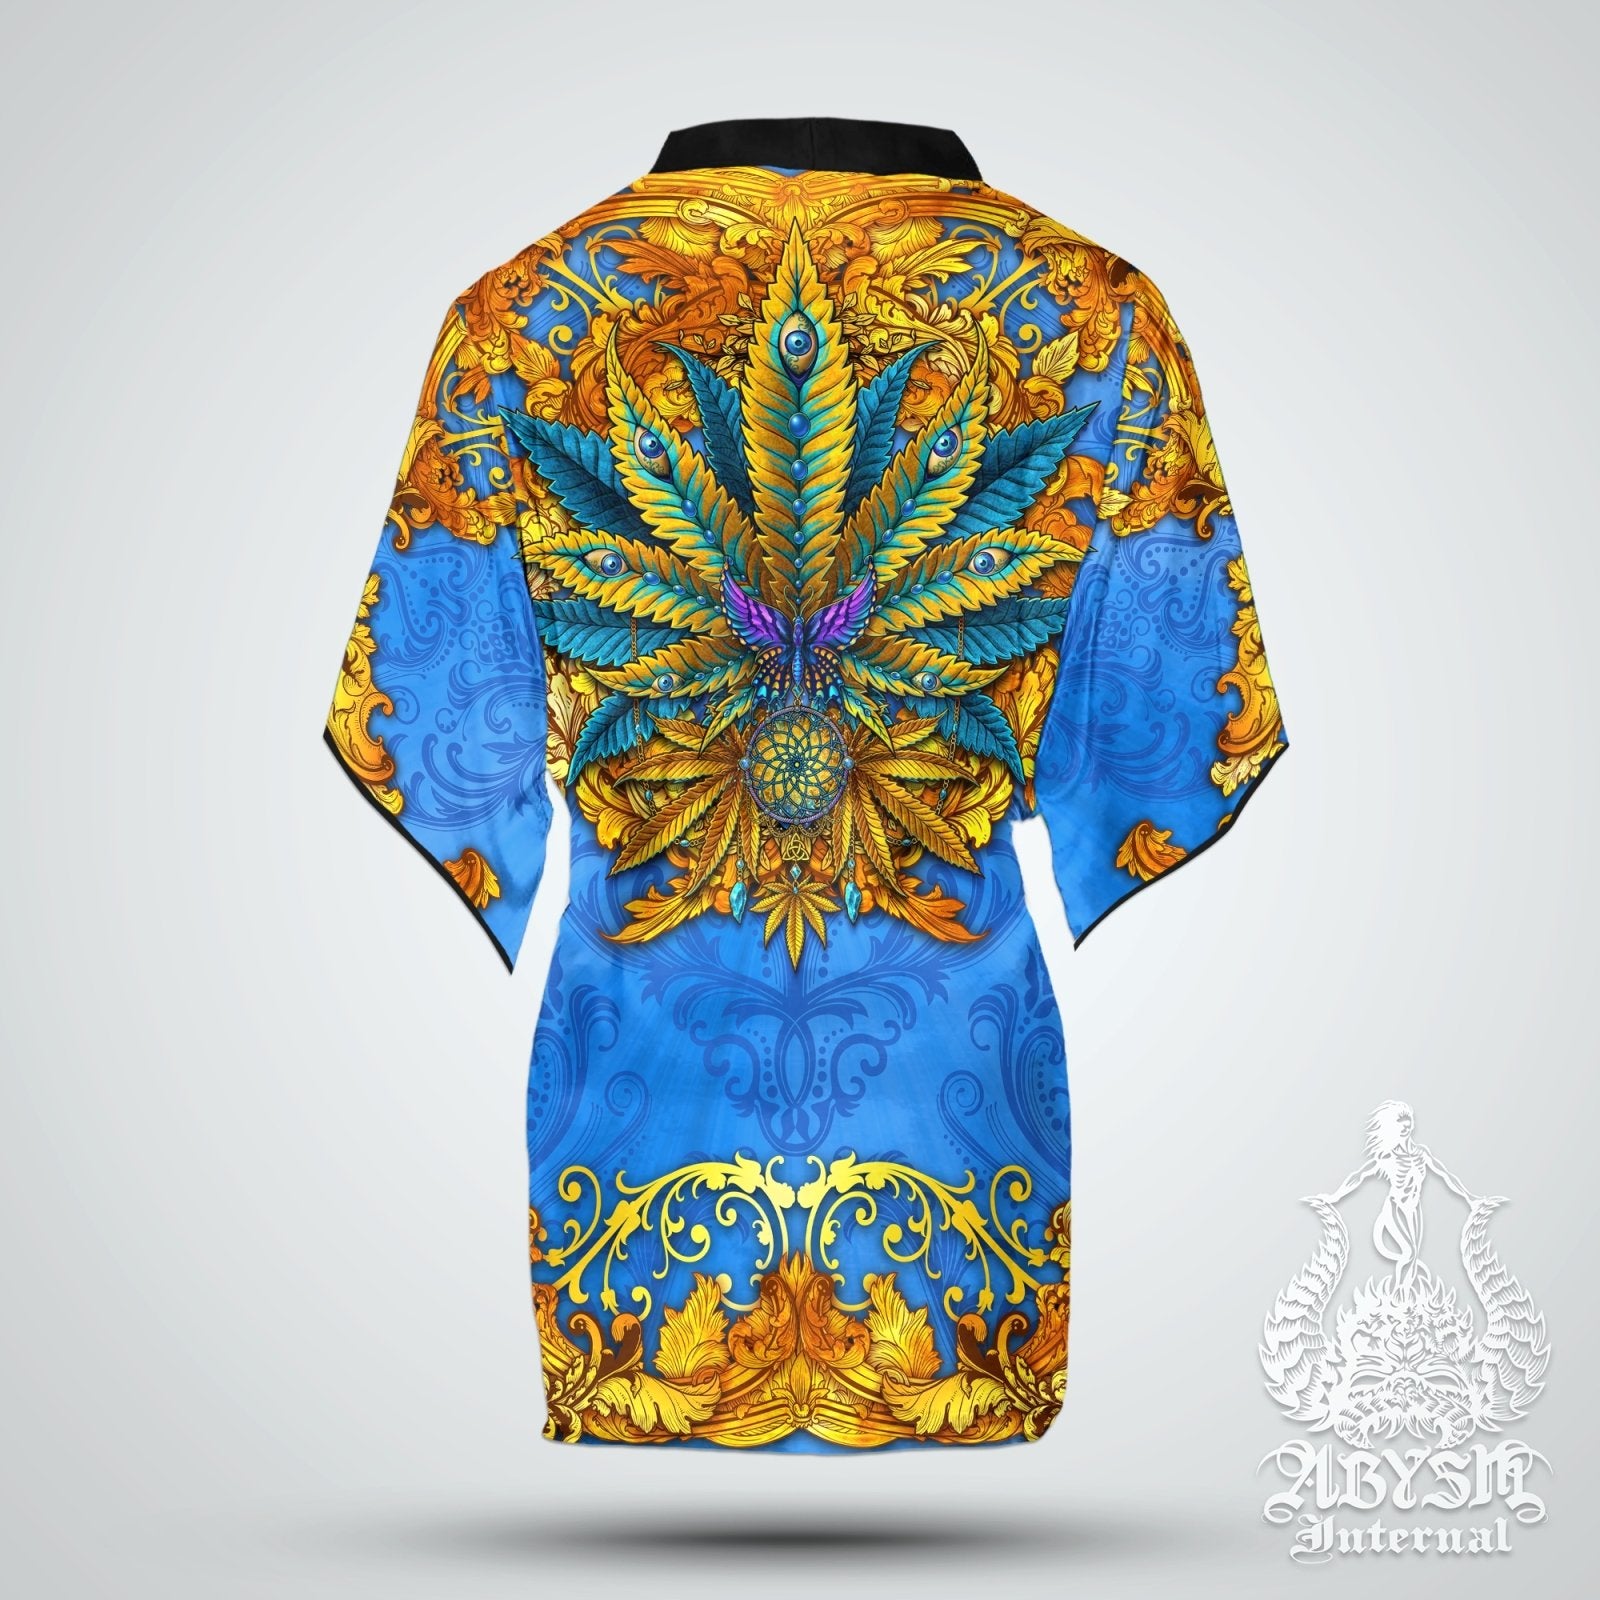 Cannabis Cover Up, Weed Outfit, Indie Party Kimono, Hippie Summer Festival Robe, 420 Gift, Alternative Clothing, Unisex - Marijuana, Cyan and Gold - Abysm Internal